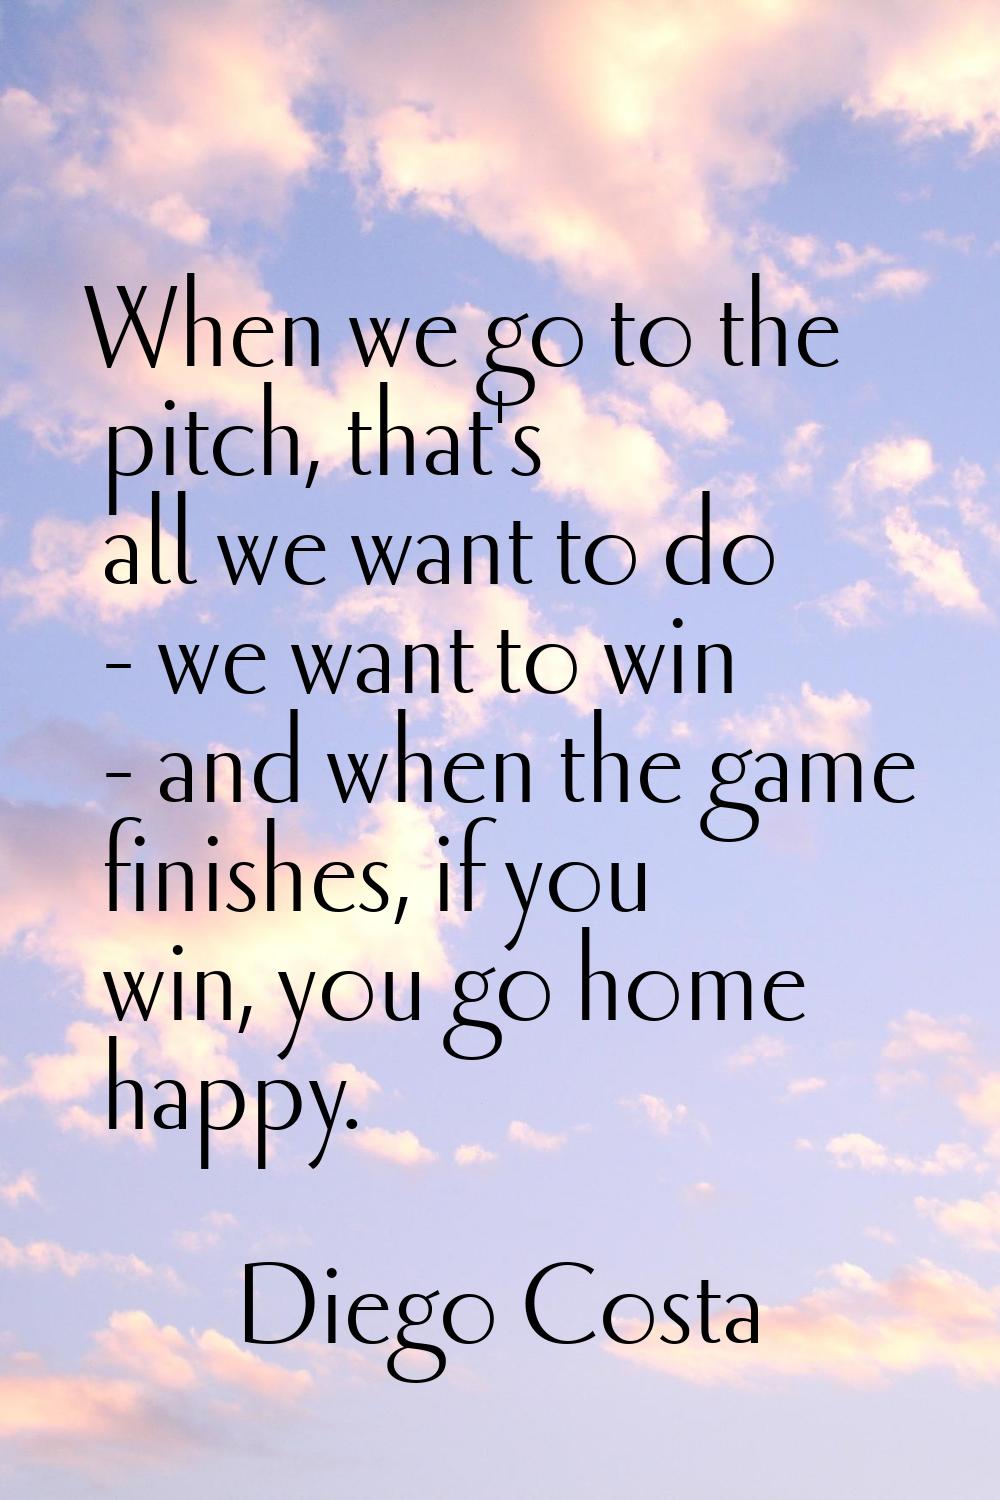 When we go to the pitch, that's all we want to do - we want to win - and when the game finishes, if